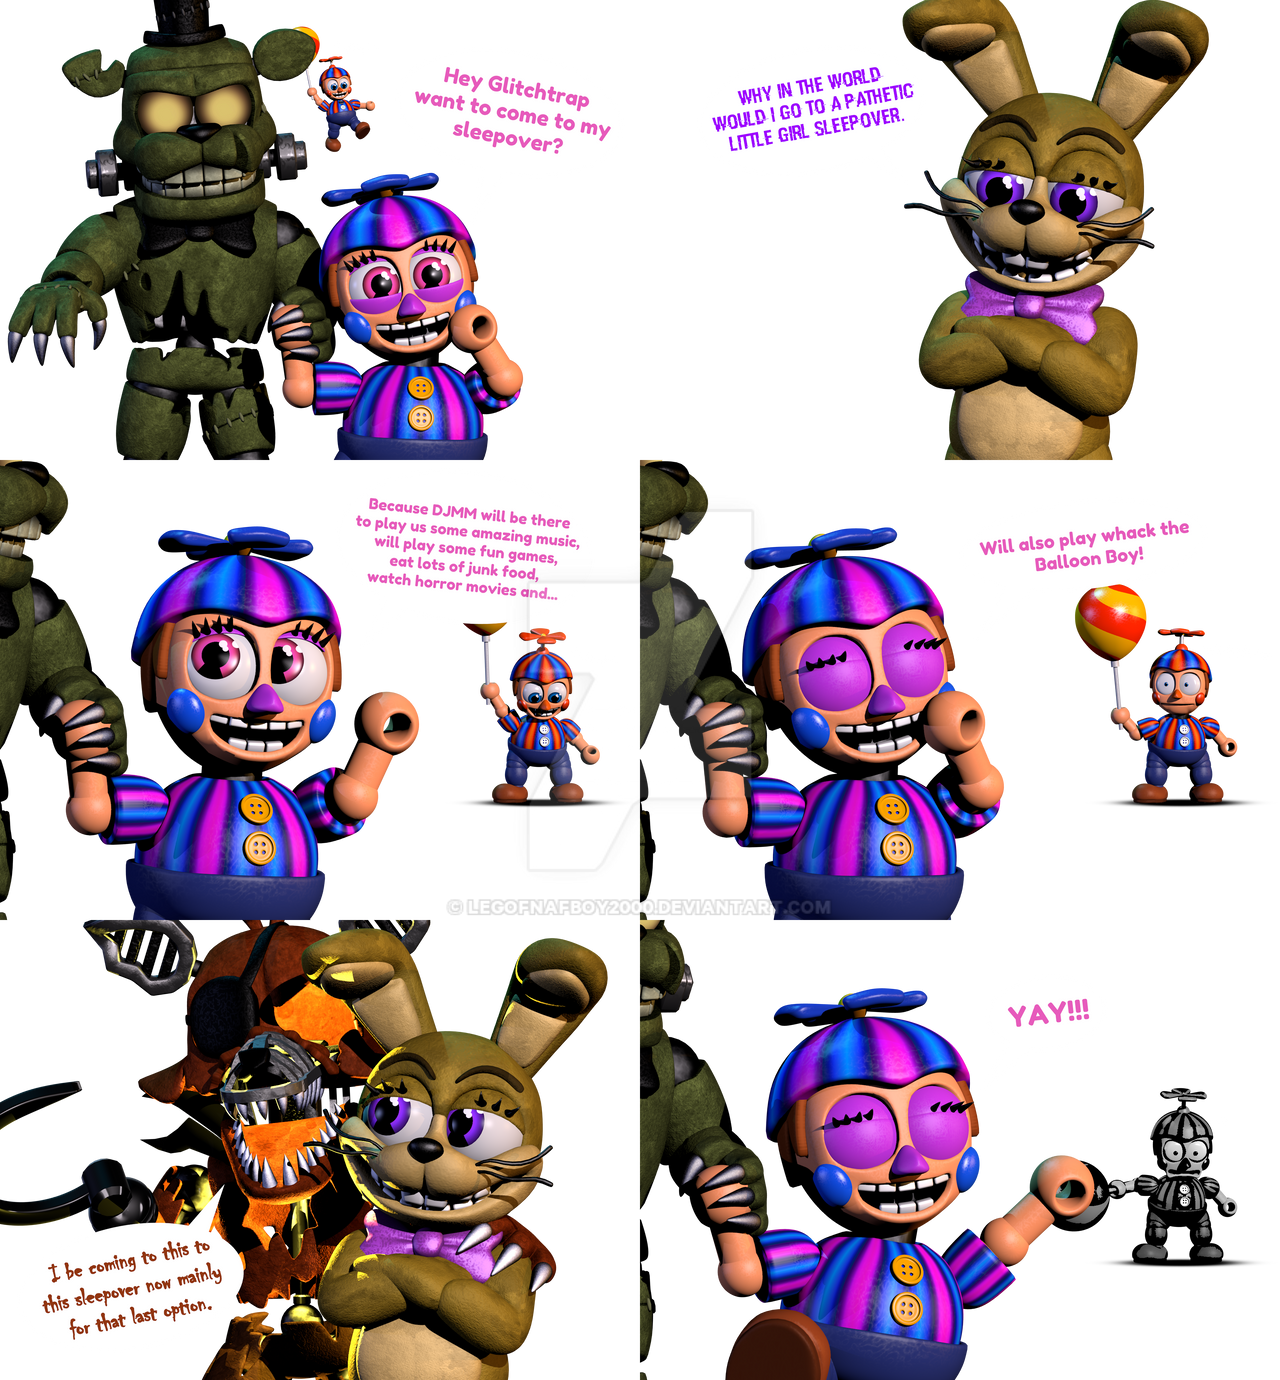 Fnaf world comic part 2 - Free stories online. Create books for kids